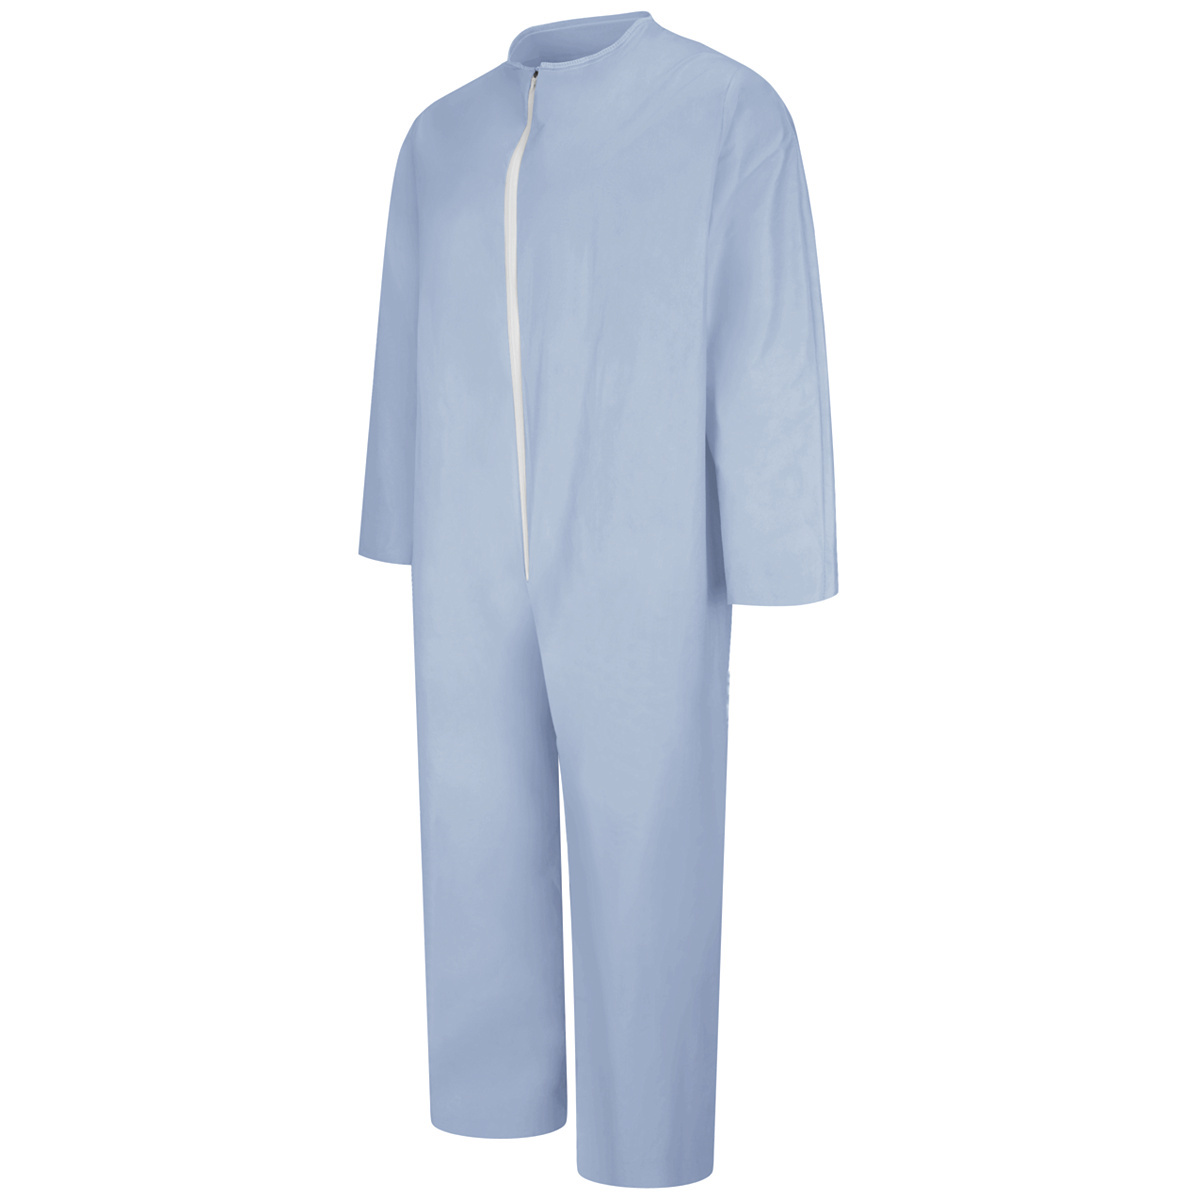 Bulwark® Medium Blue Flame-resistant, Sontara® Disposable Coveralls (Availability restrictions apply.)